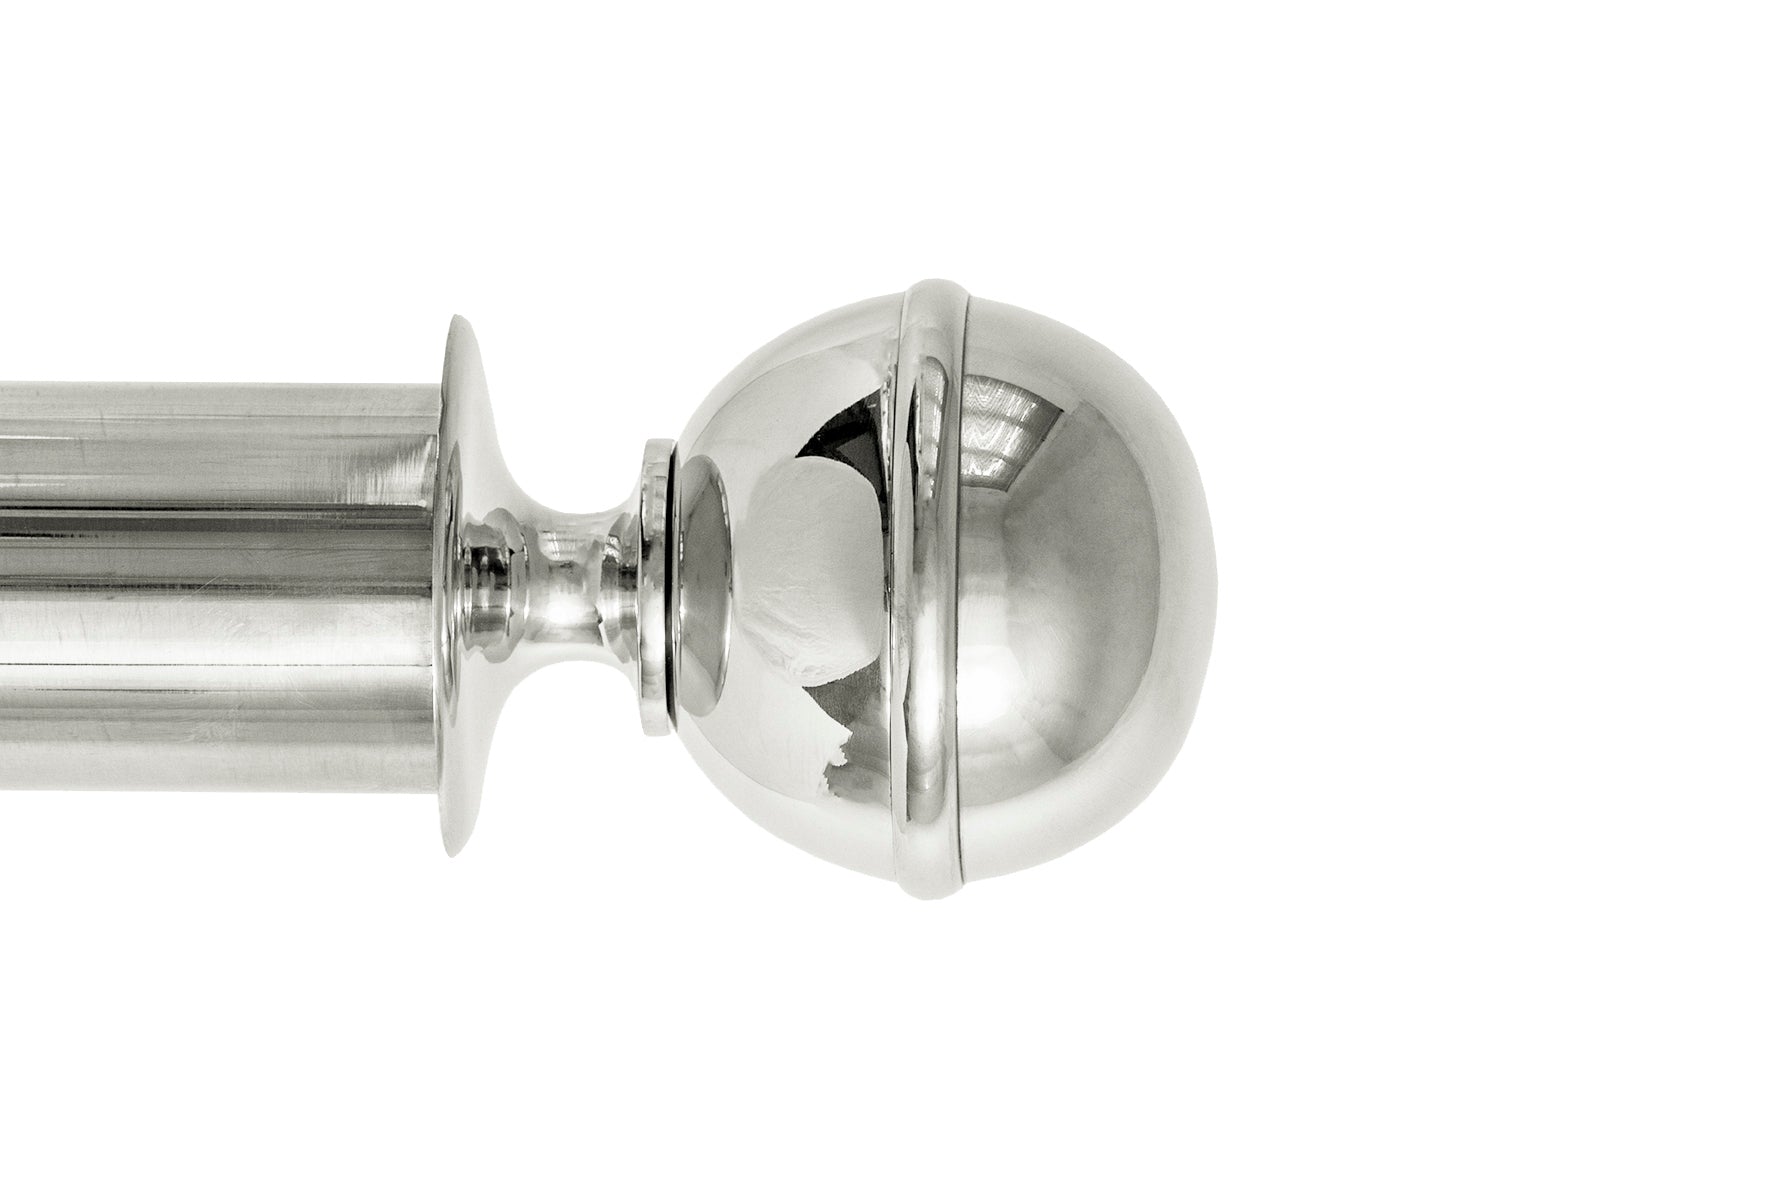 Tillys Classic One Rib Ball Finial Curtain Pole Set in Polished Nickel